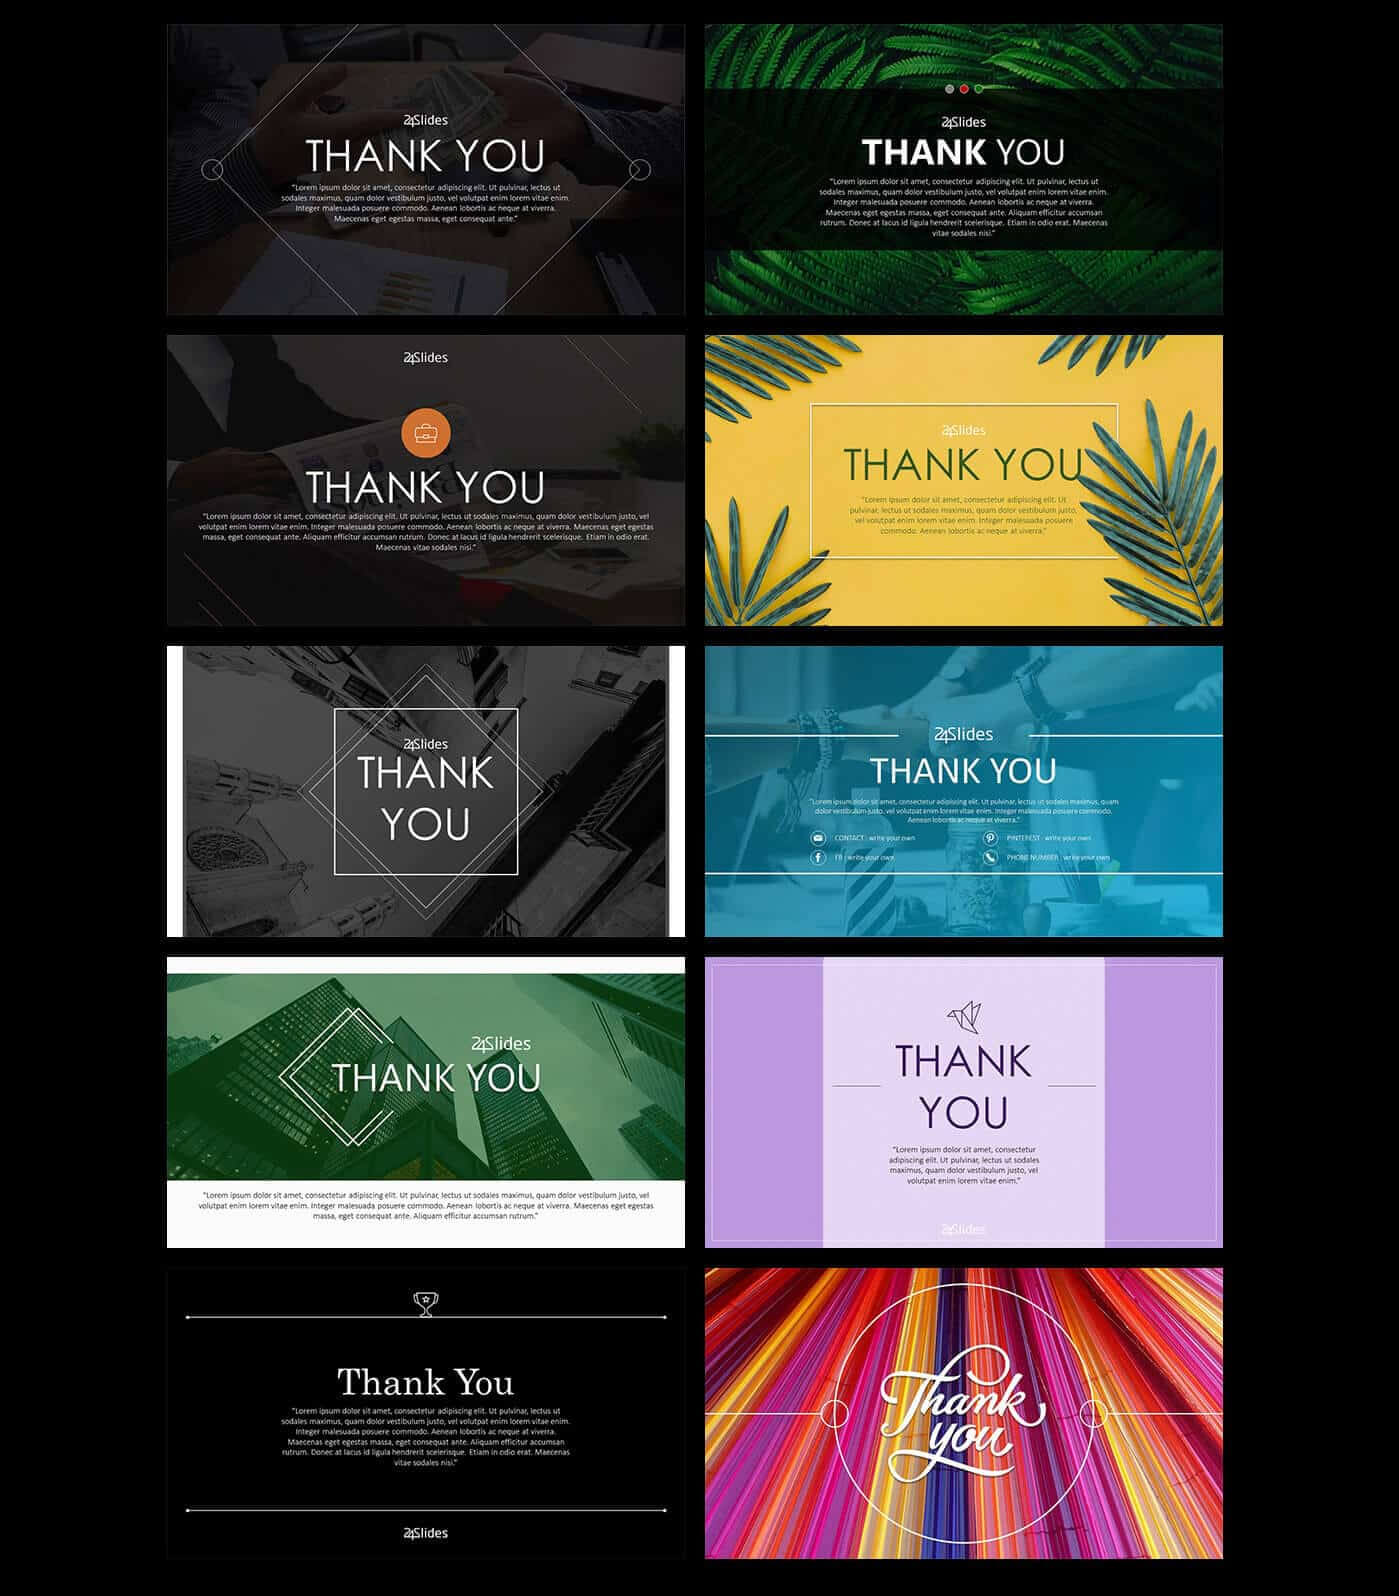 20+ Free Creative Powerpoint Templates For Your Next Intended For Powerpoint Sample Templates Free Download